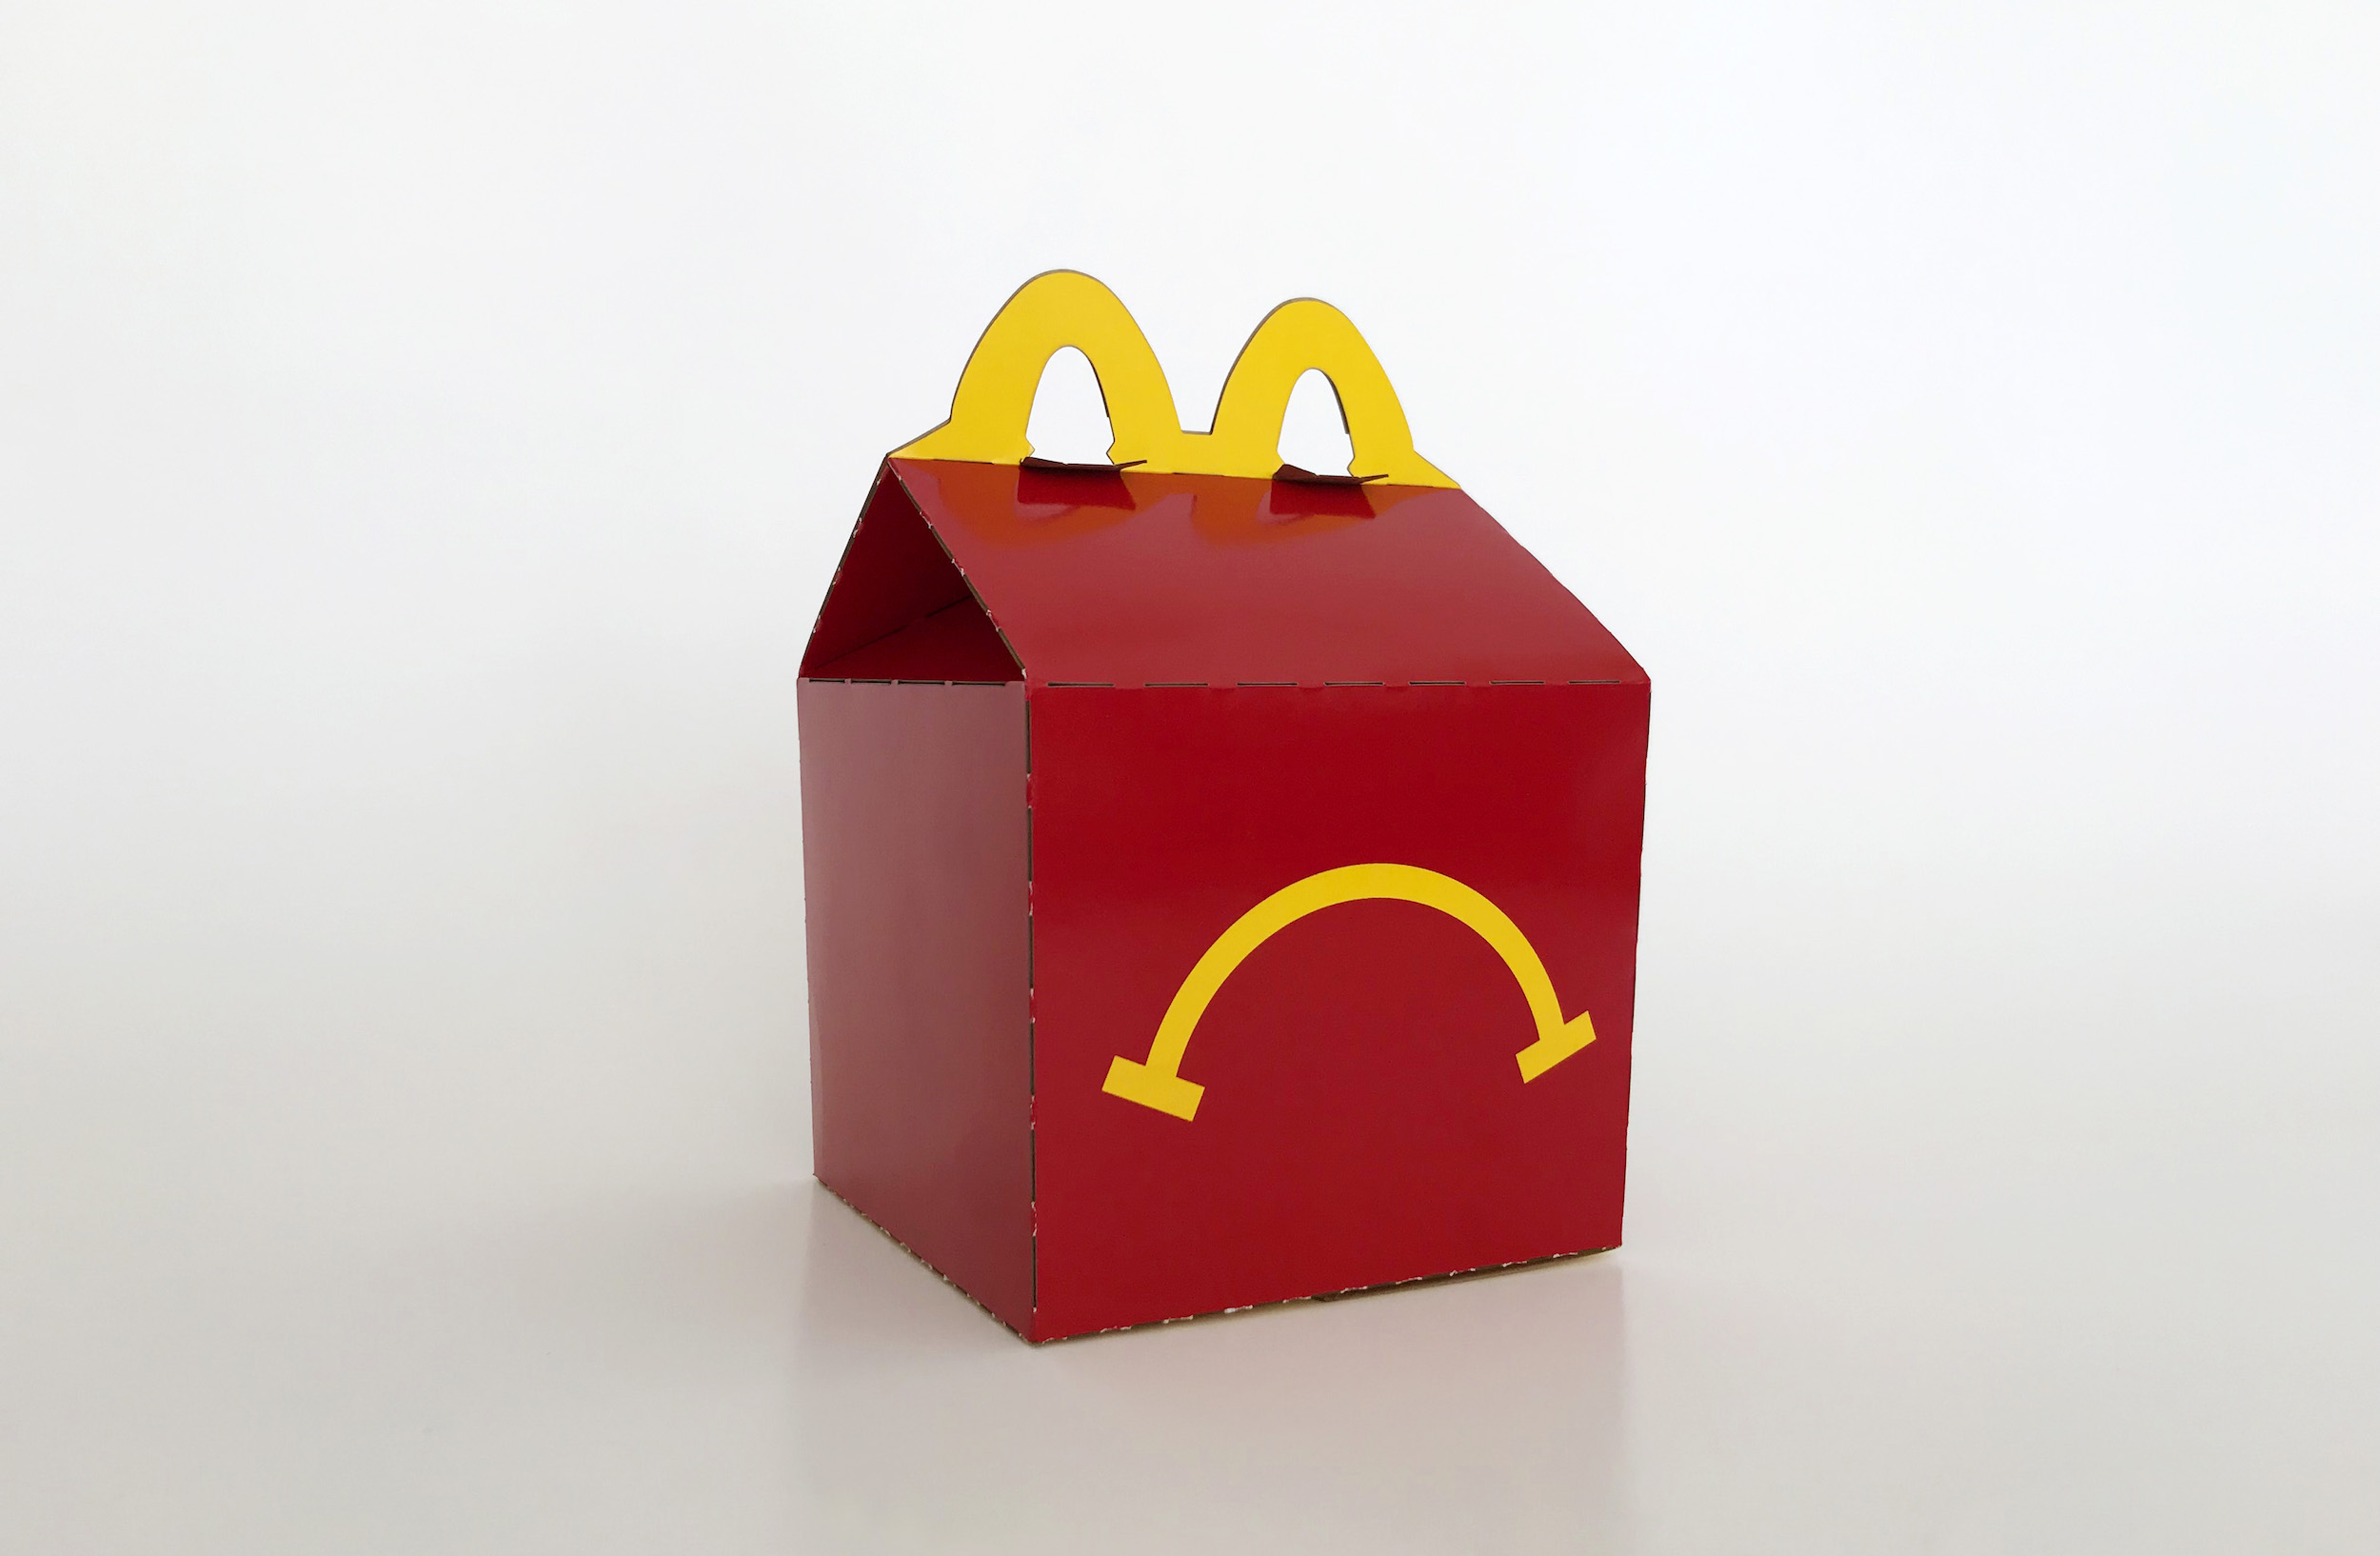 Unhappy Meal, Image courtesy of the artist.